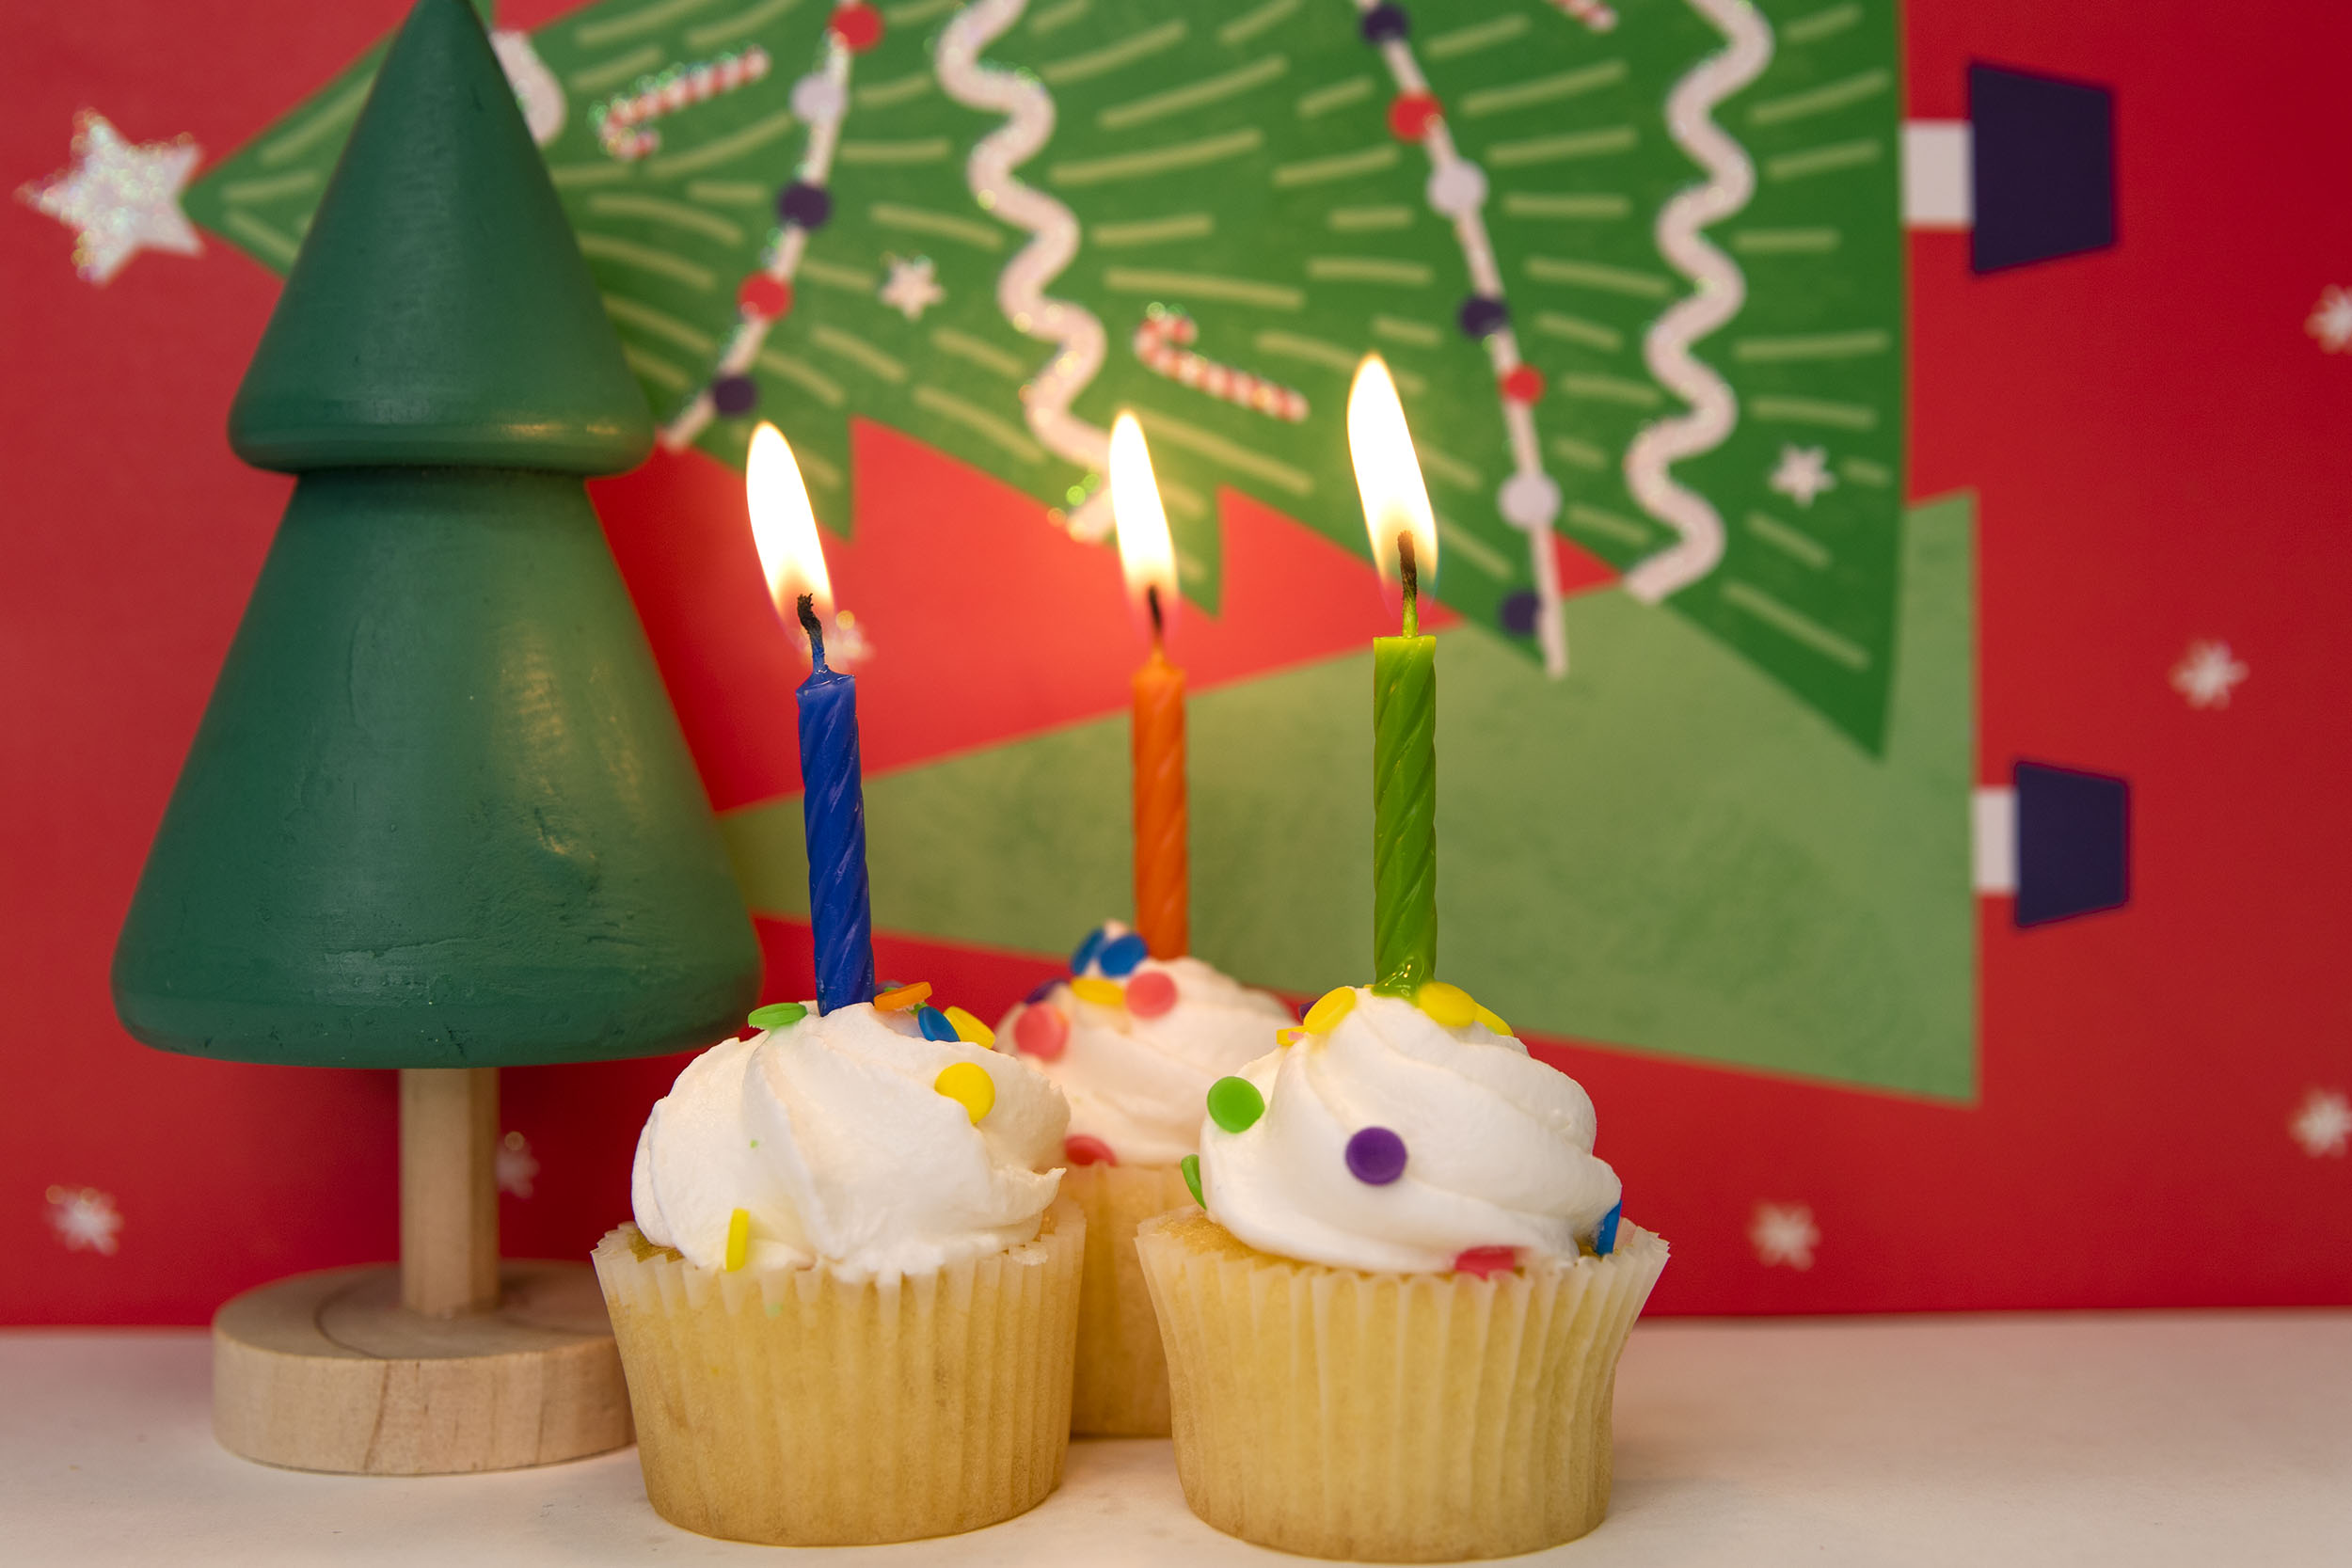 Photo of cupcakes with lit birthday candles and Christmas decorations